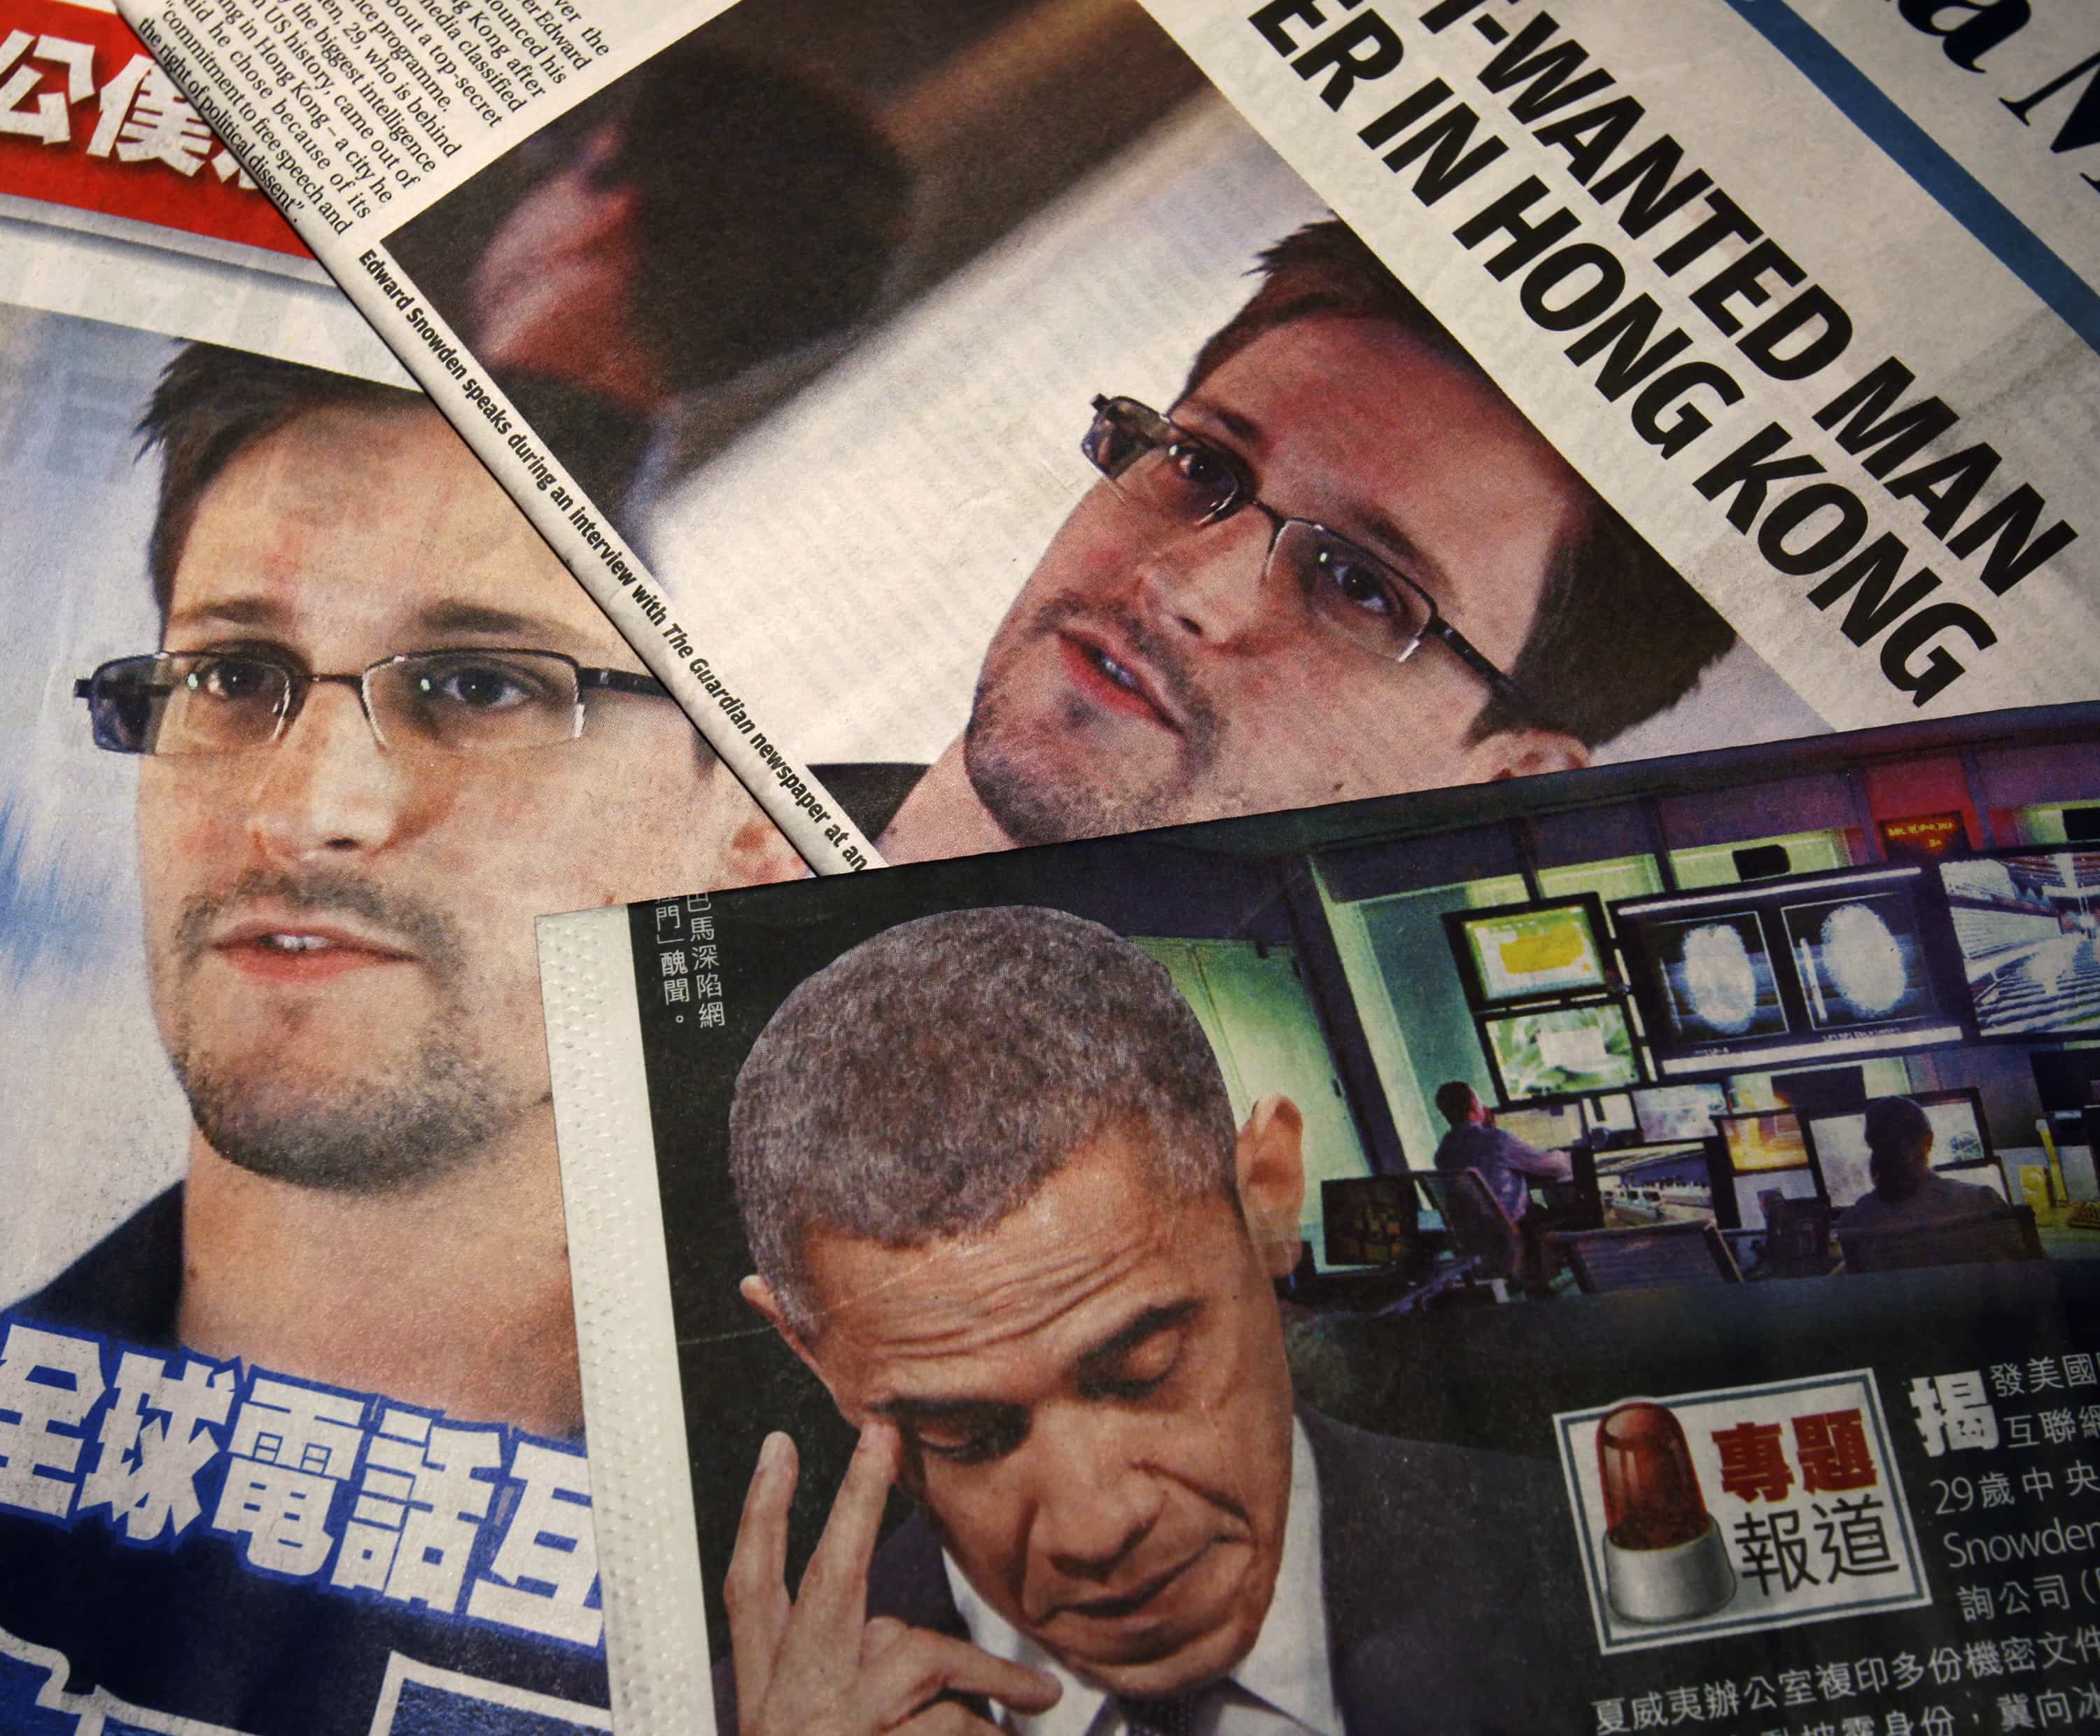 Photos of Edward Snowden, a contractor at the National Security Agency (NSA), and U.S. President Barack Obama on the front pages of local English and Chinese newspapers in Hong Kong, REUTERS/Bobby Yip